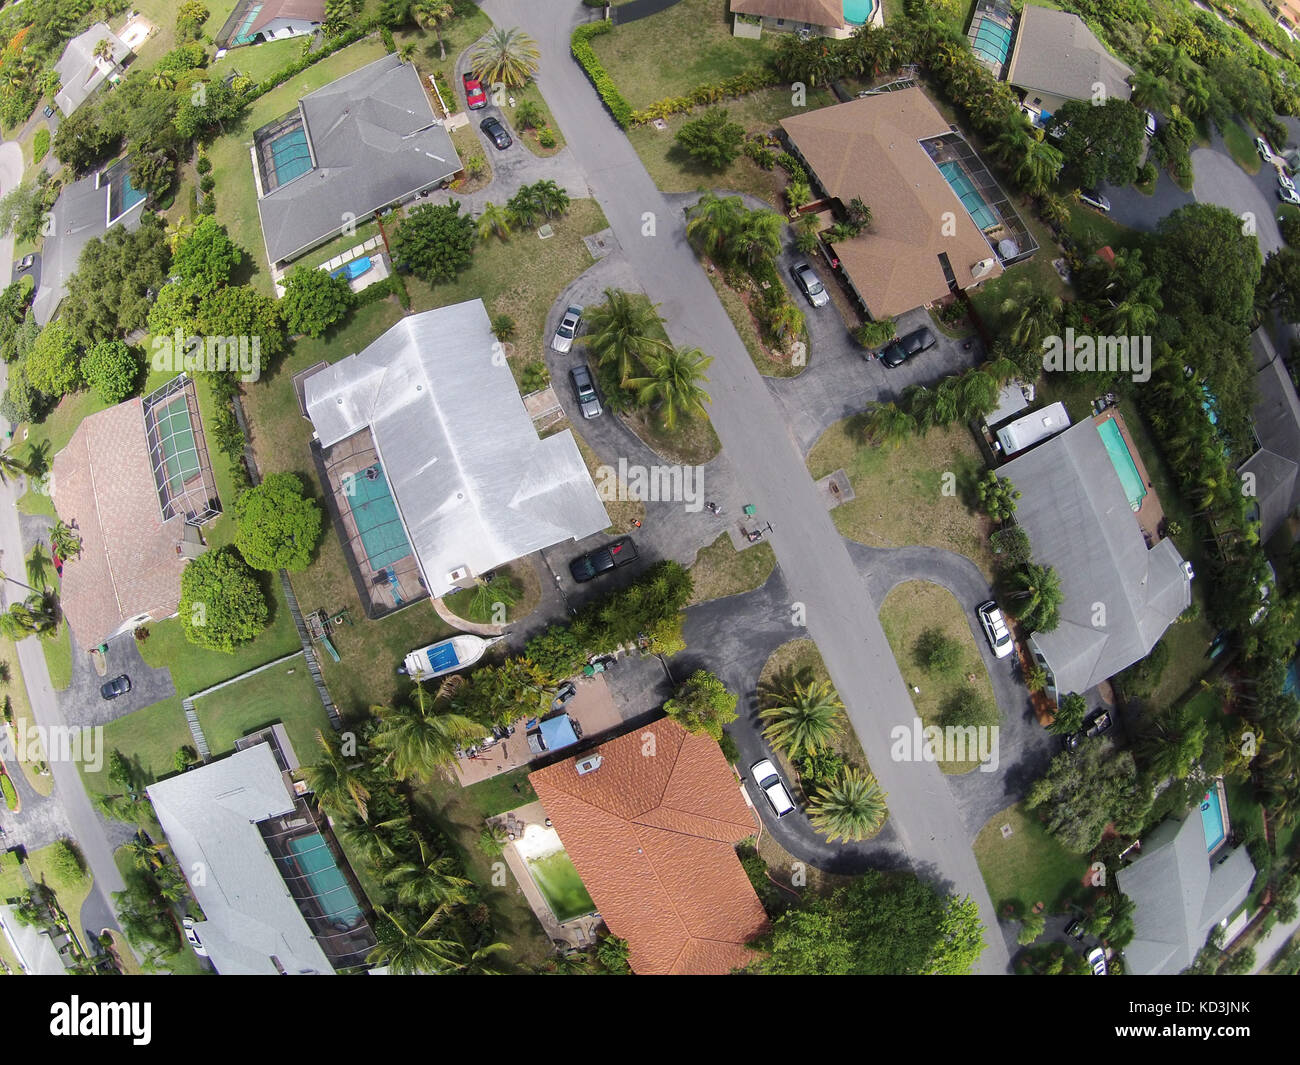 Residential neighborhood streets in Florida seen from above Stock Photo